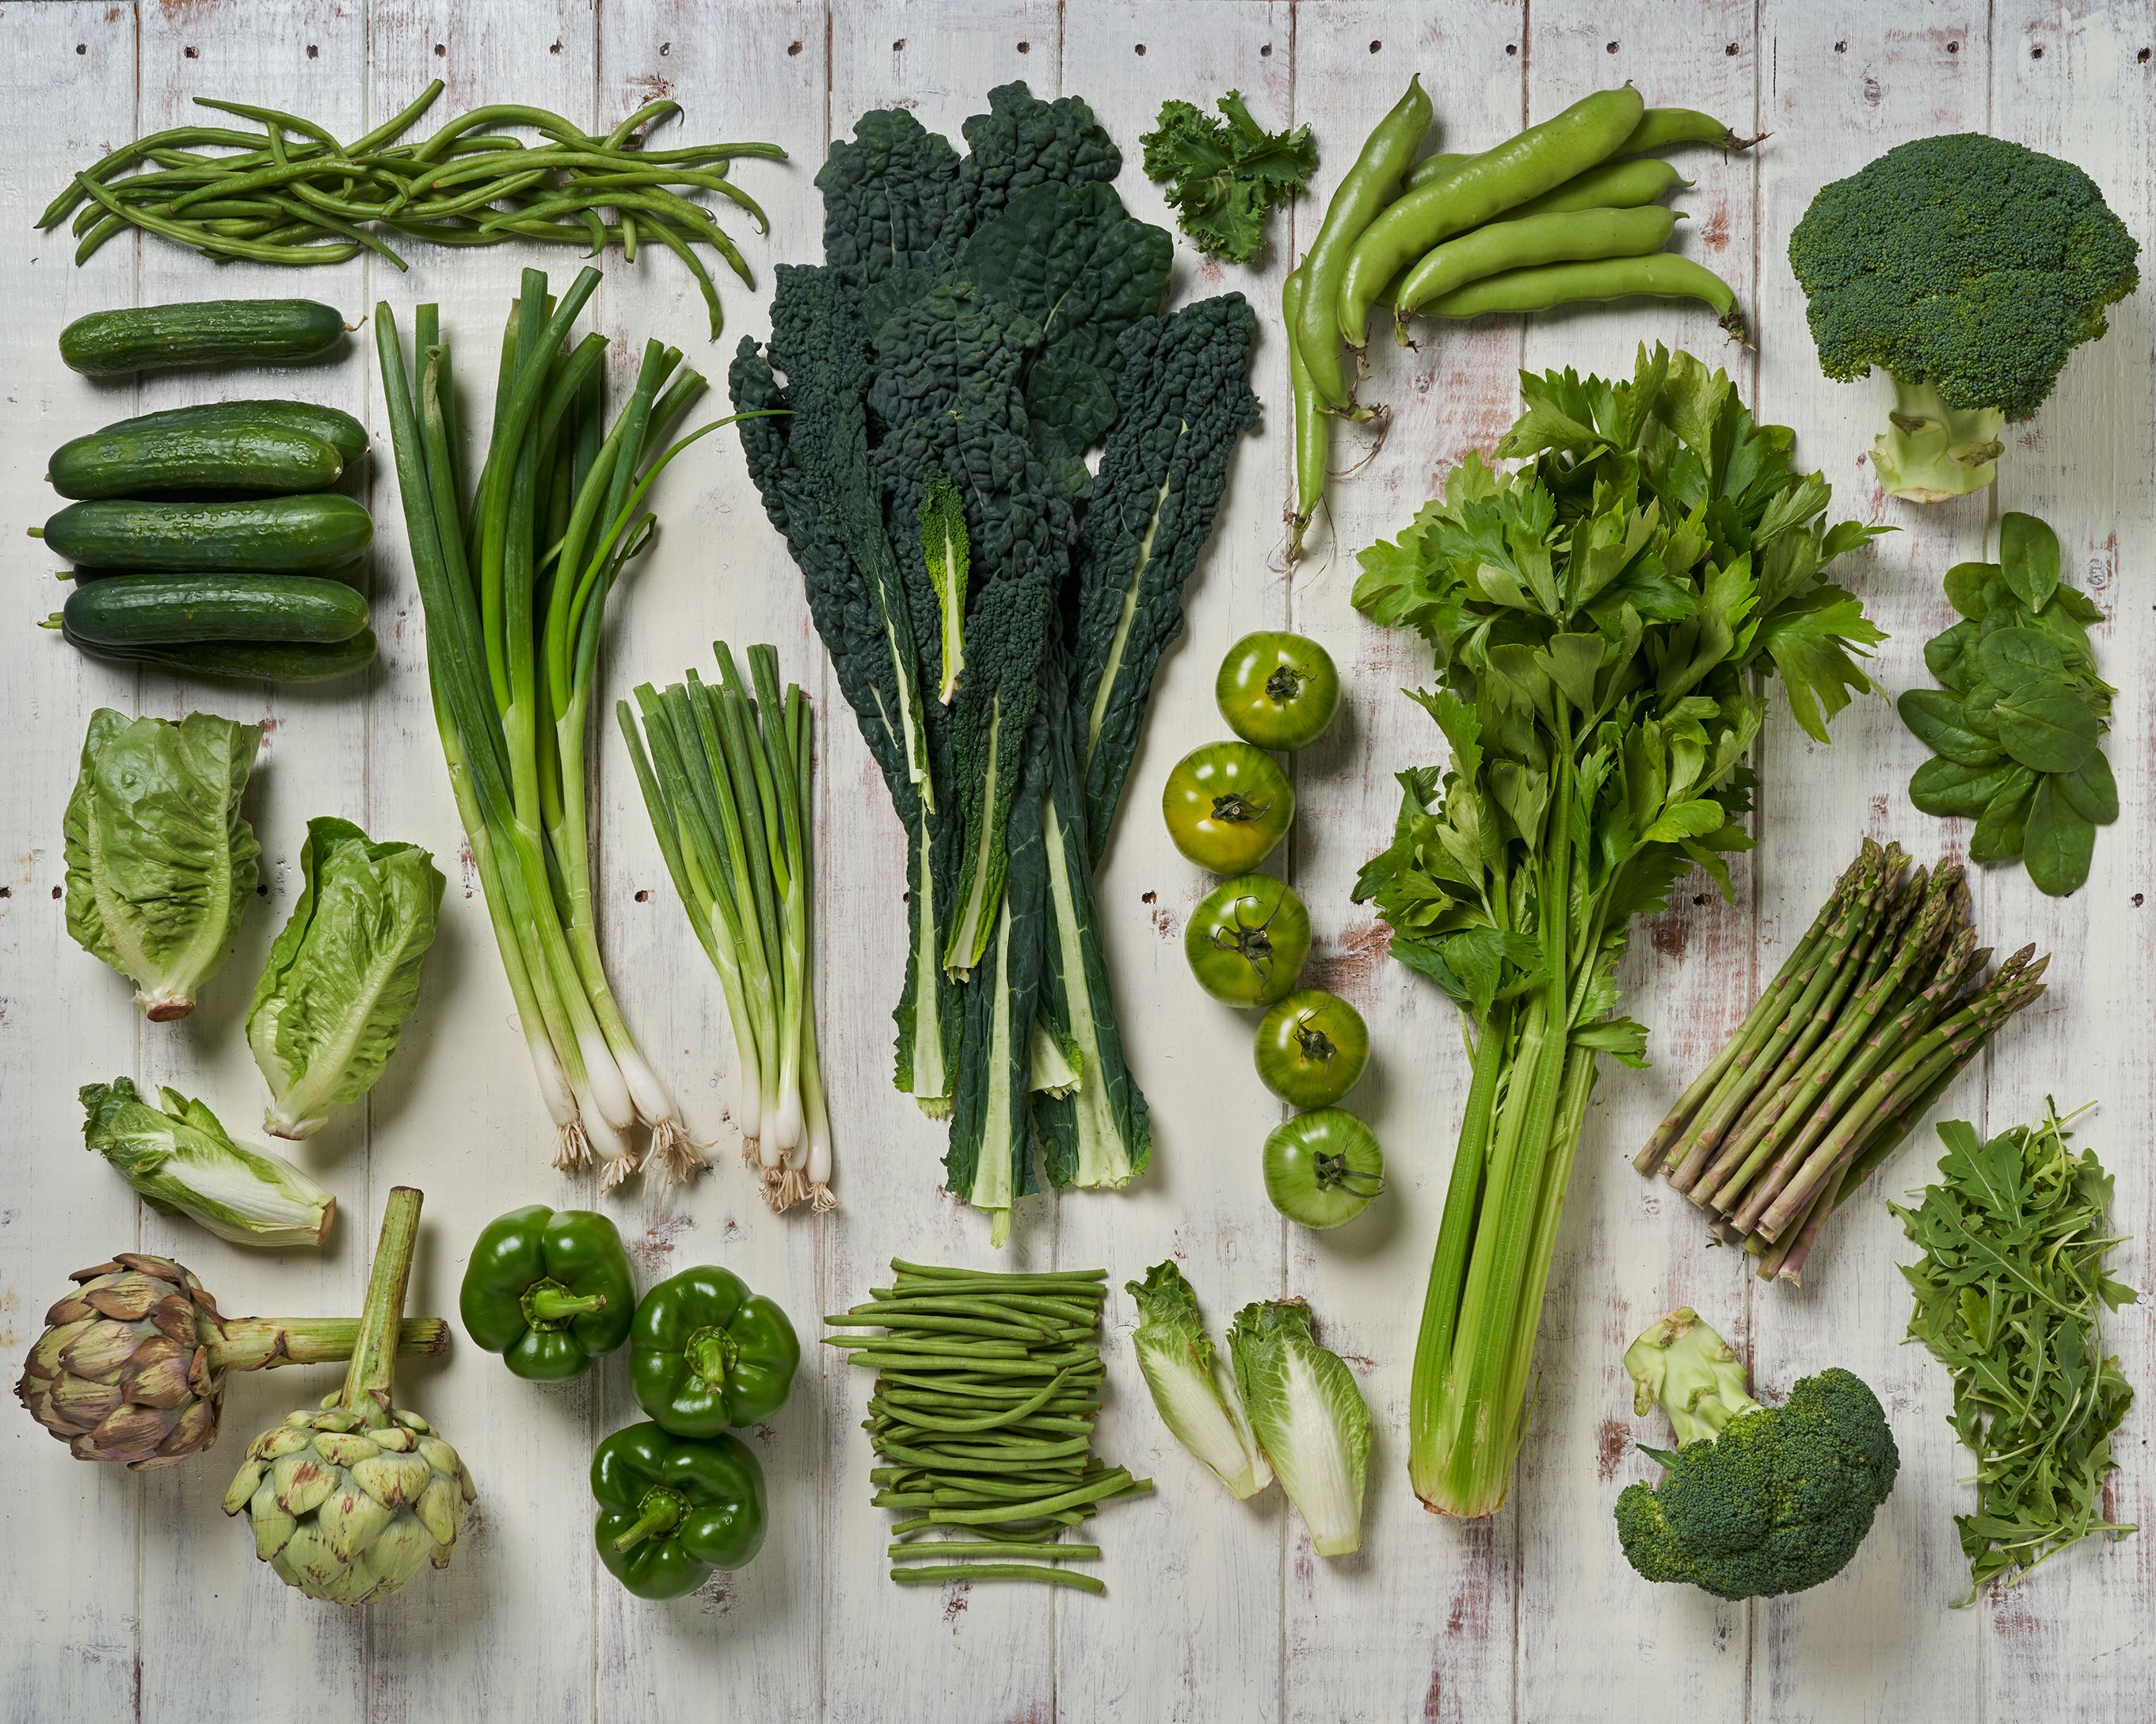 What Vegetables Are Good For Inflammation